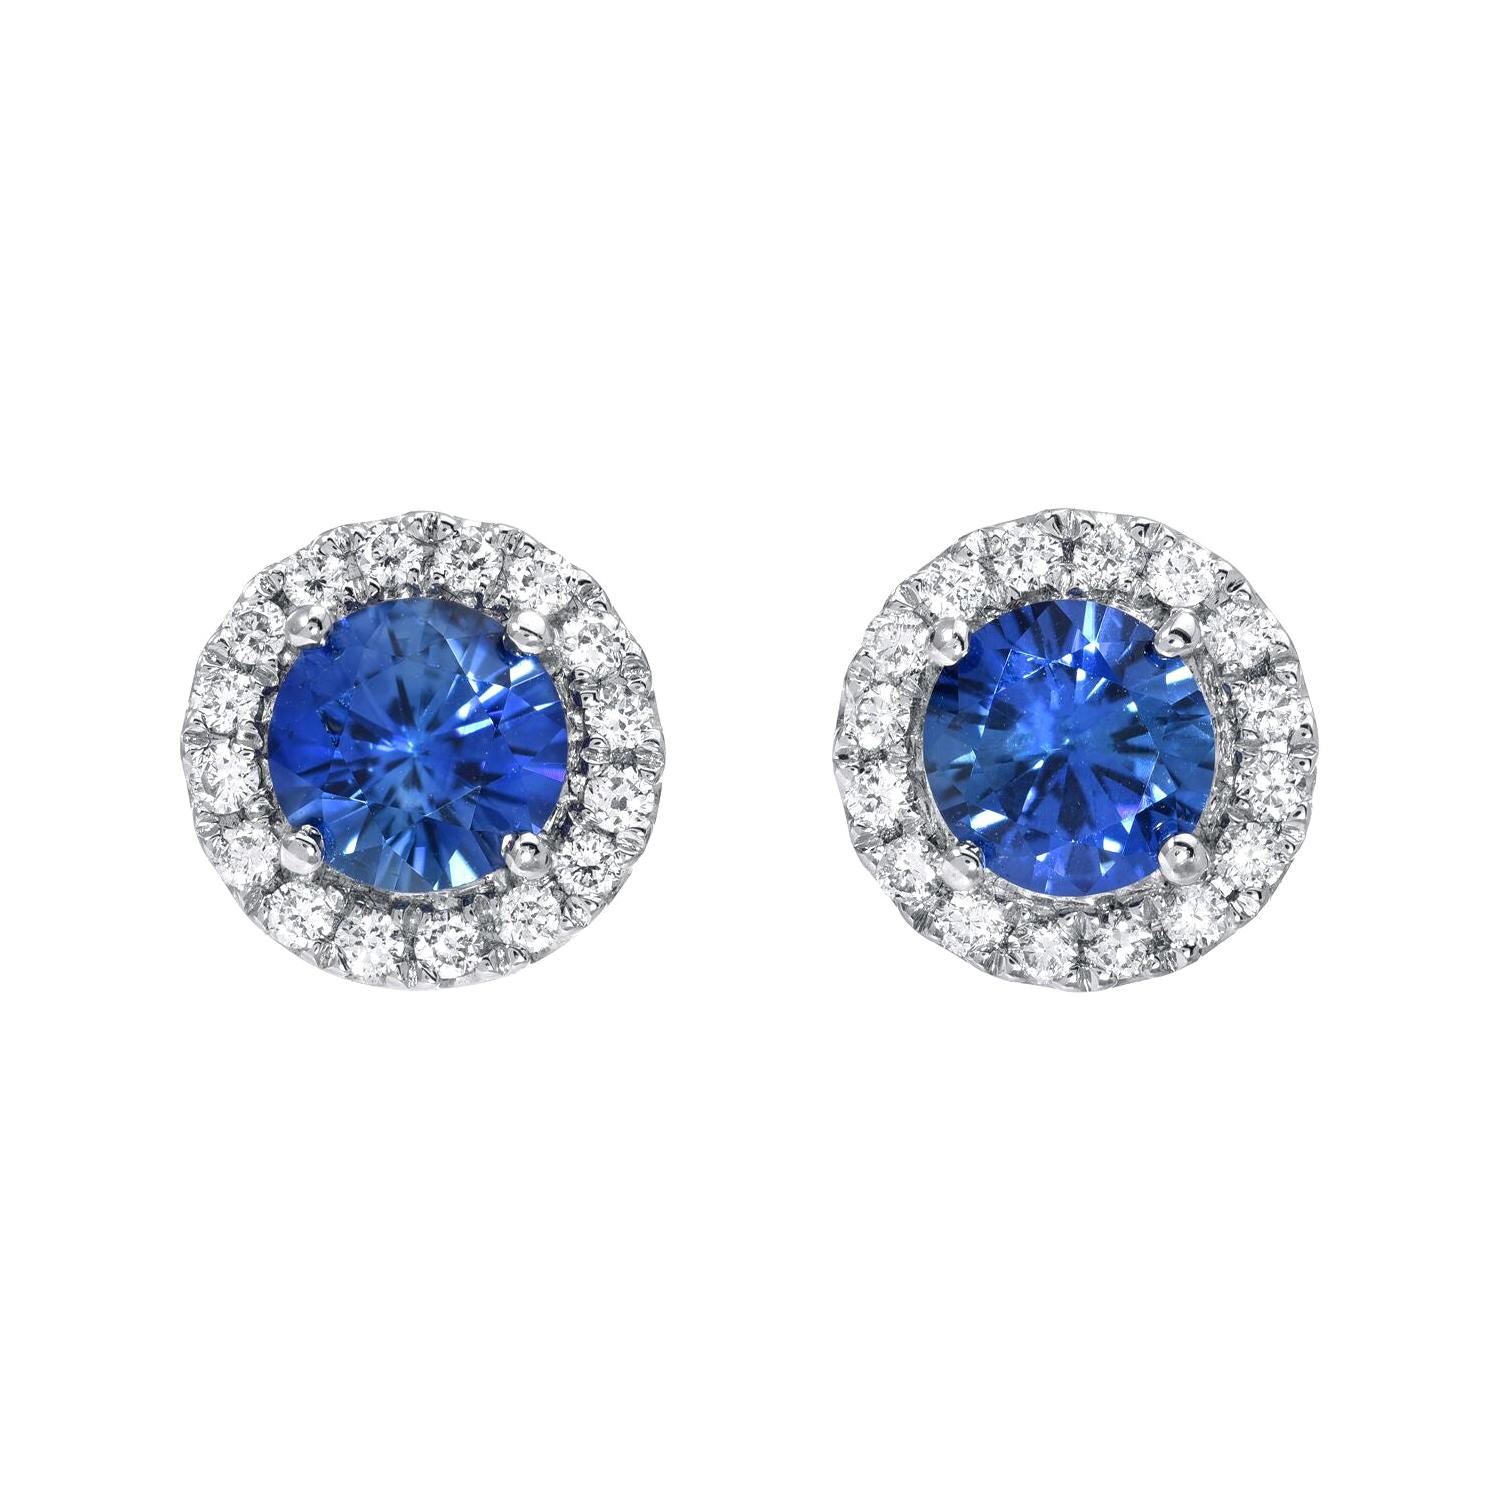 Sapphire Earrings Round 0.97 Carats